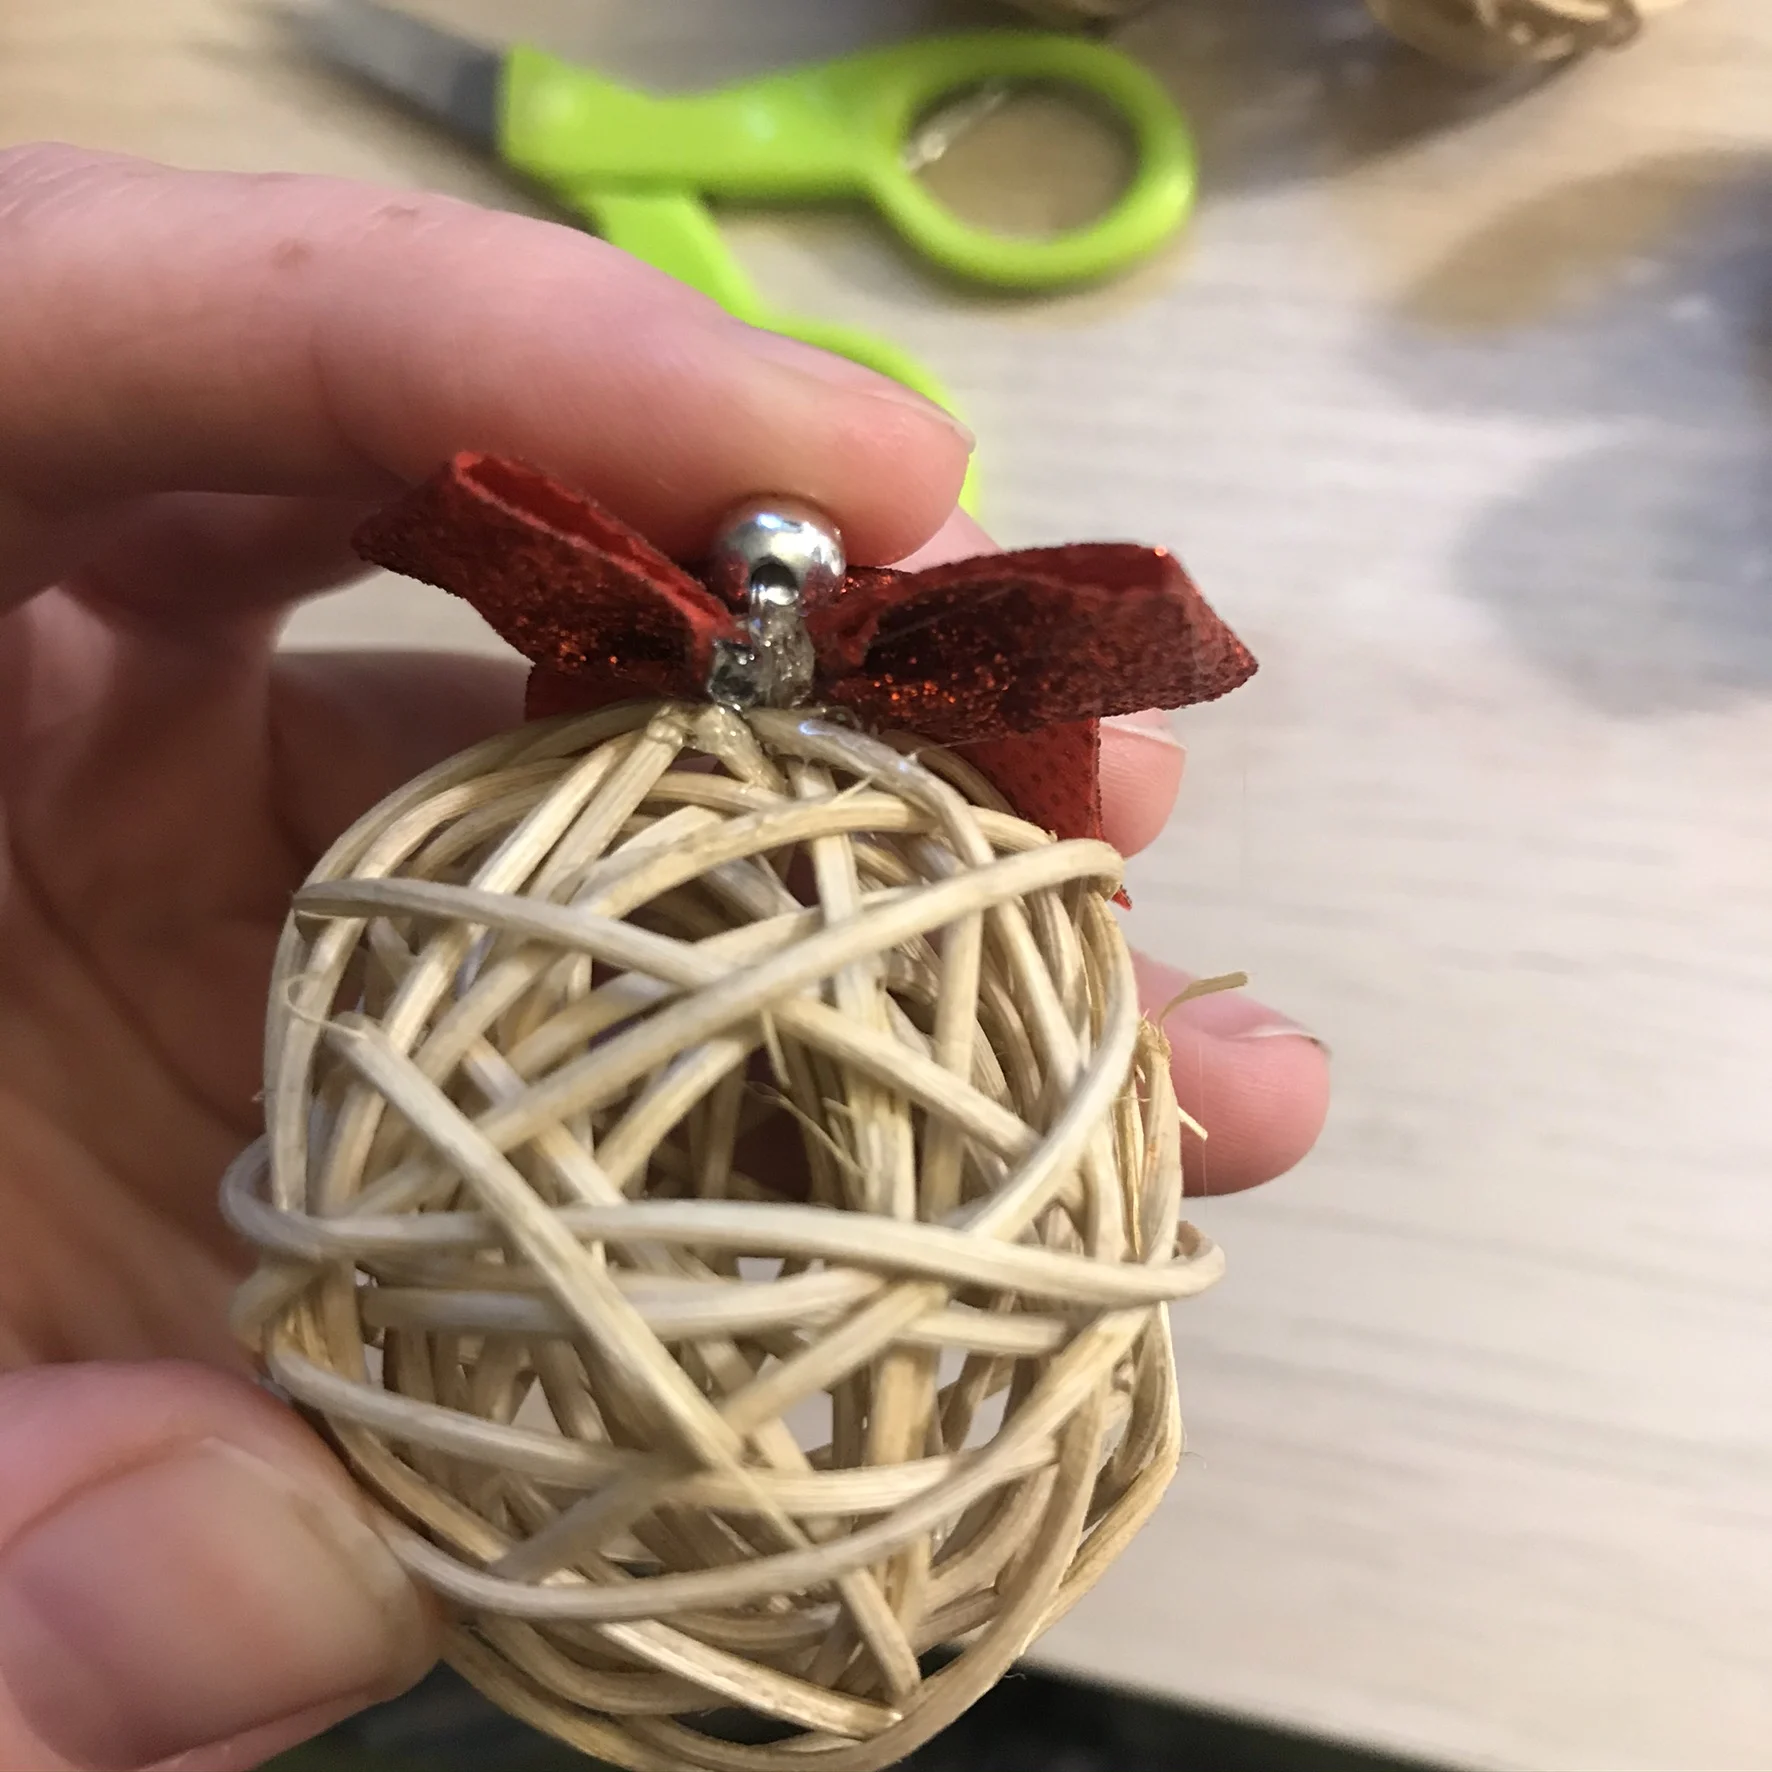 cut off ends of twist tie and hot glue